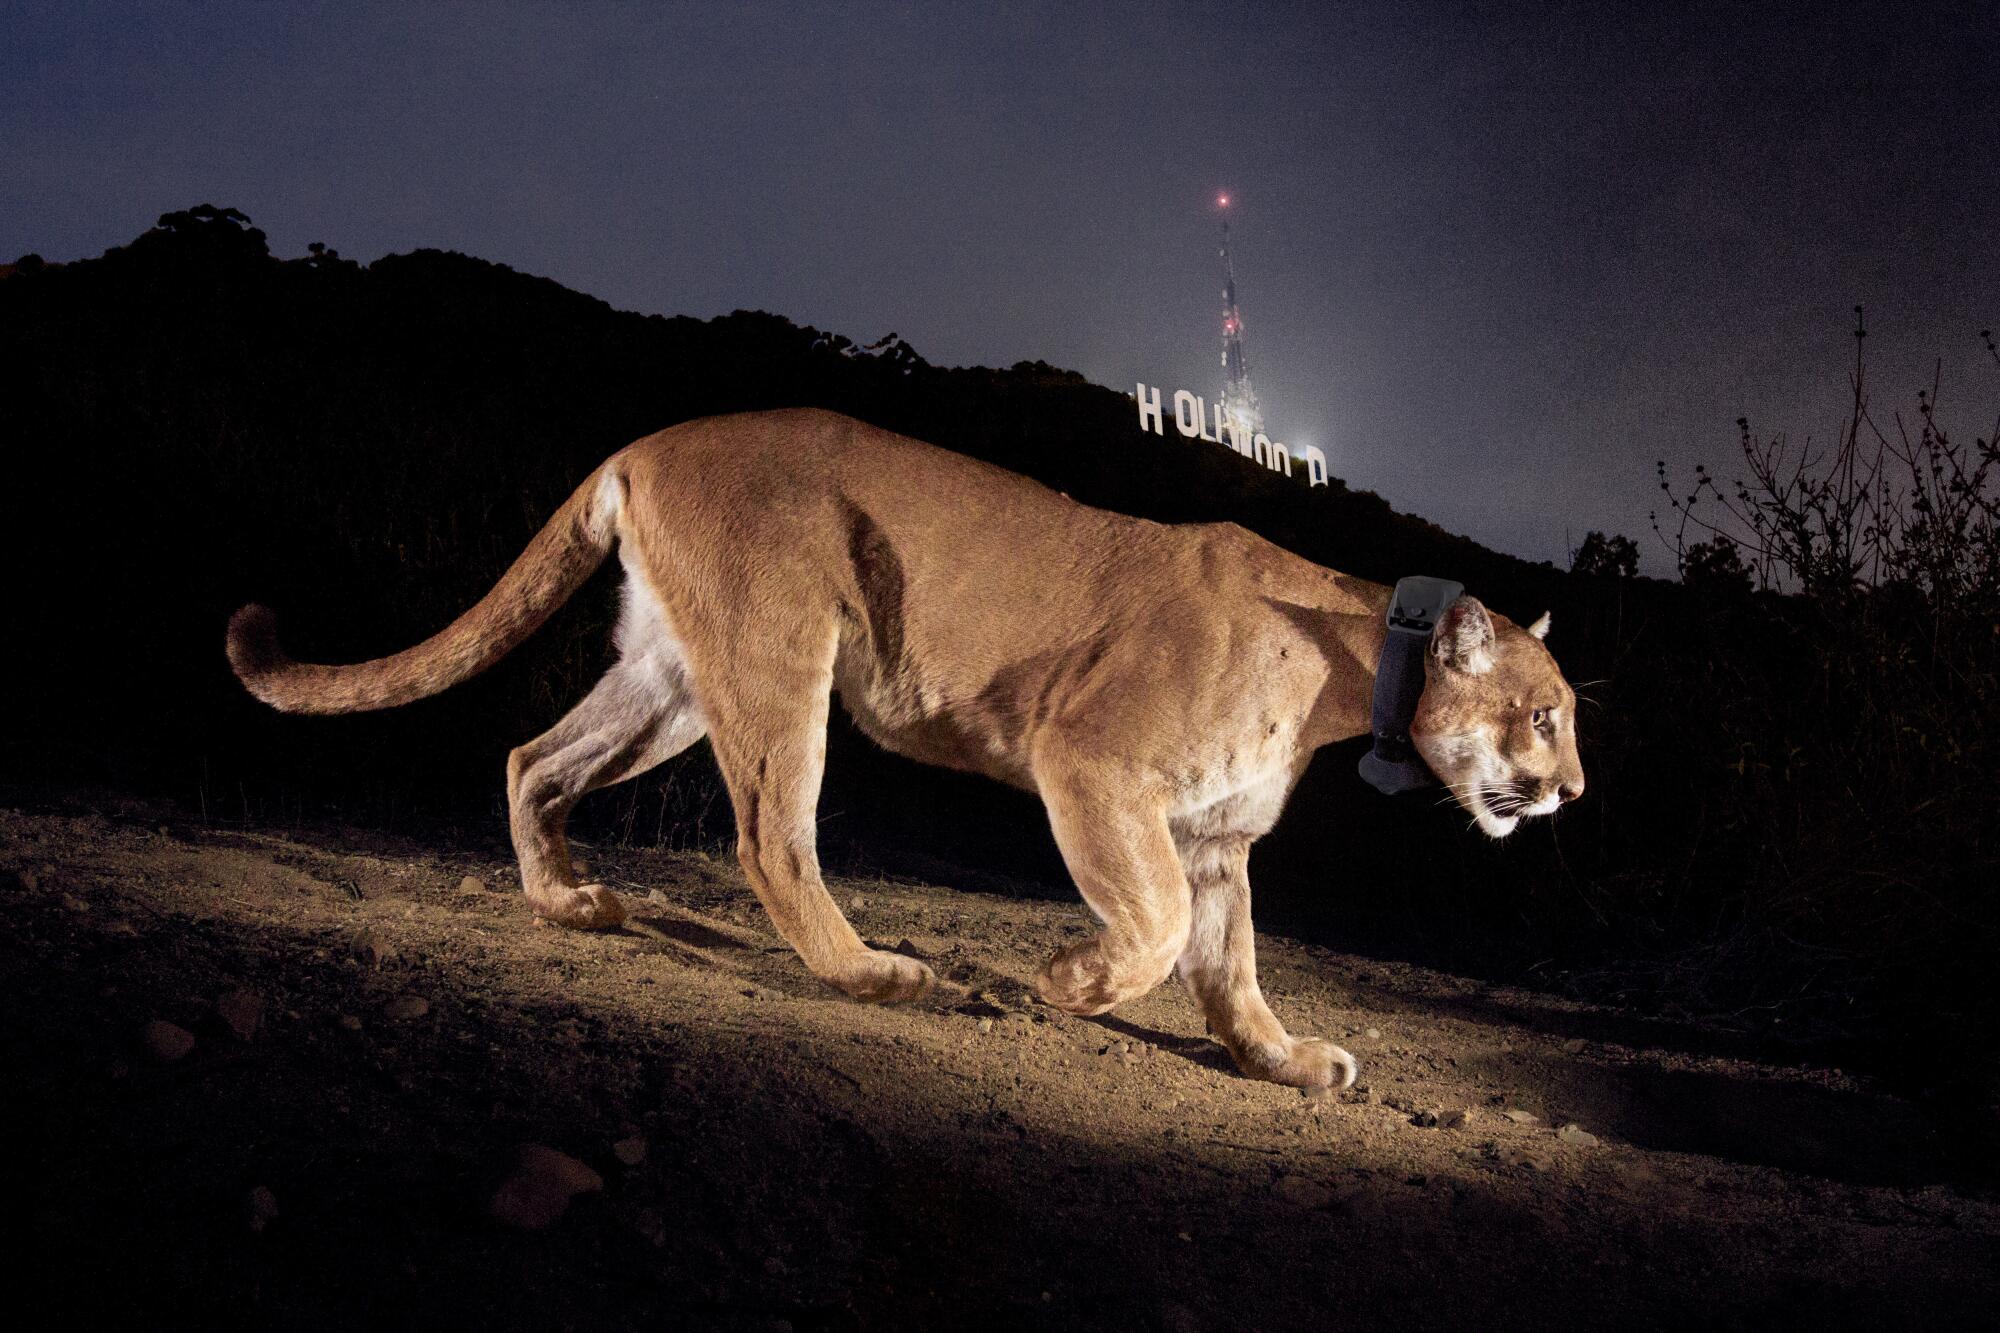 A mountain lion is lit up against a dark hilly background with the Hollywood sign